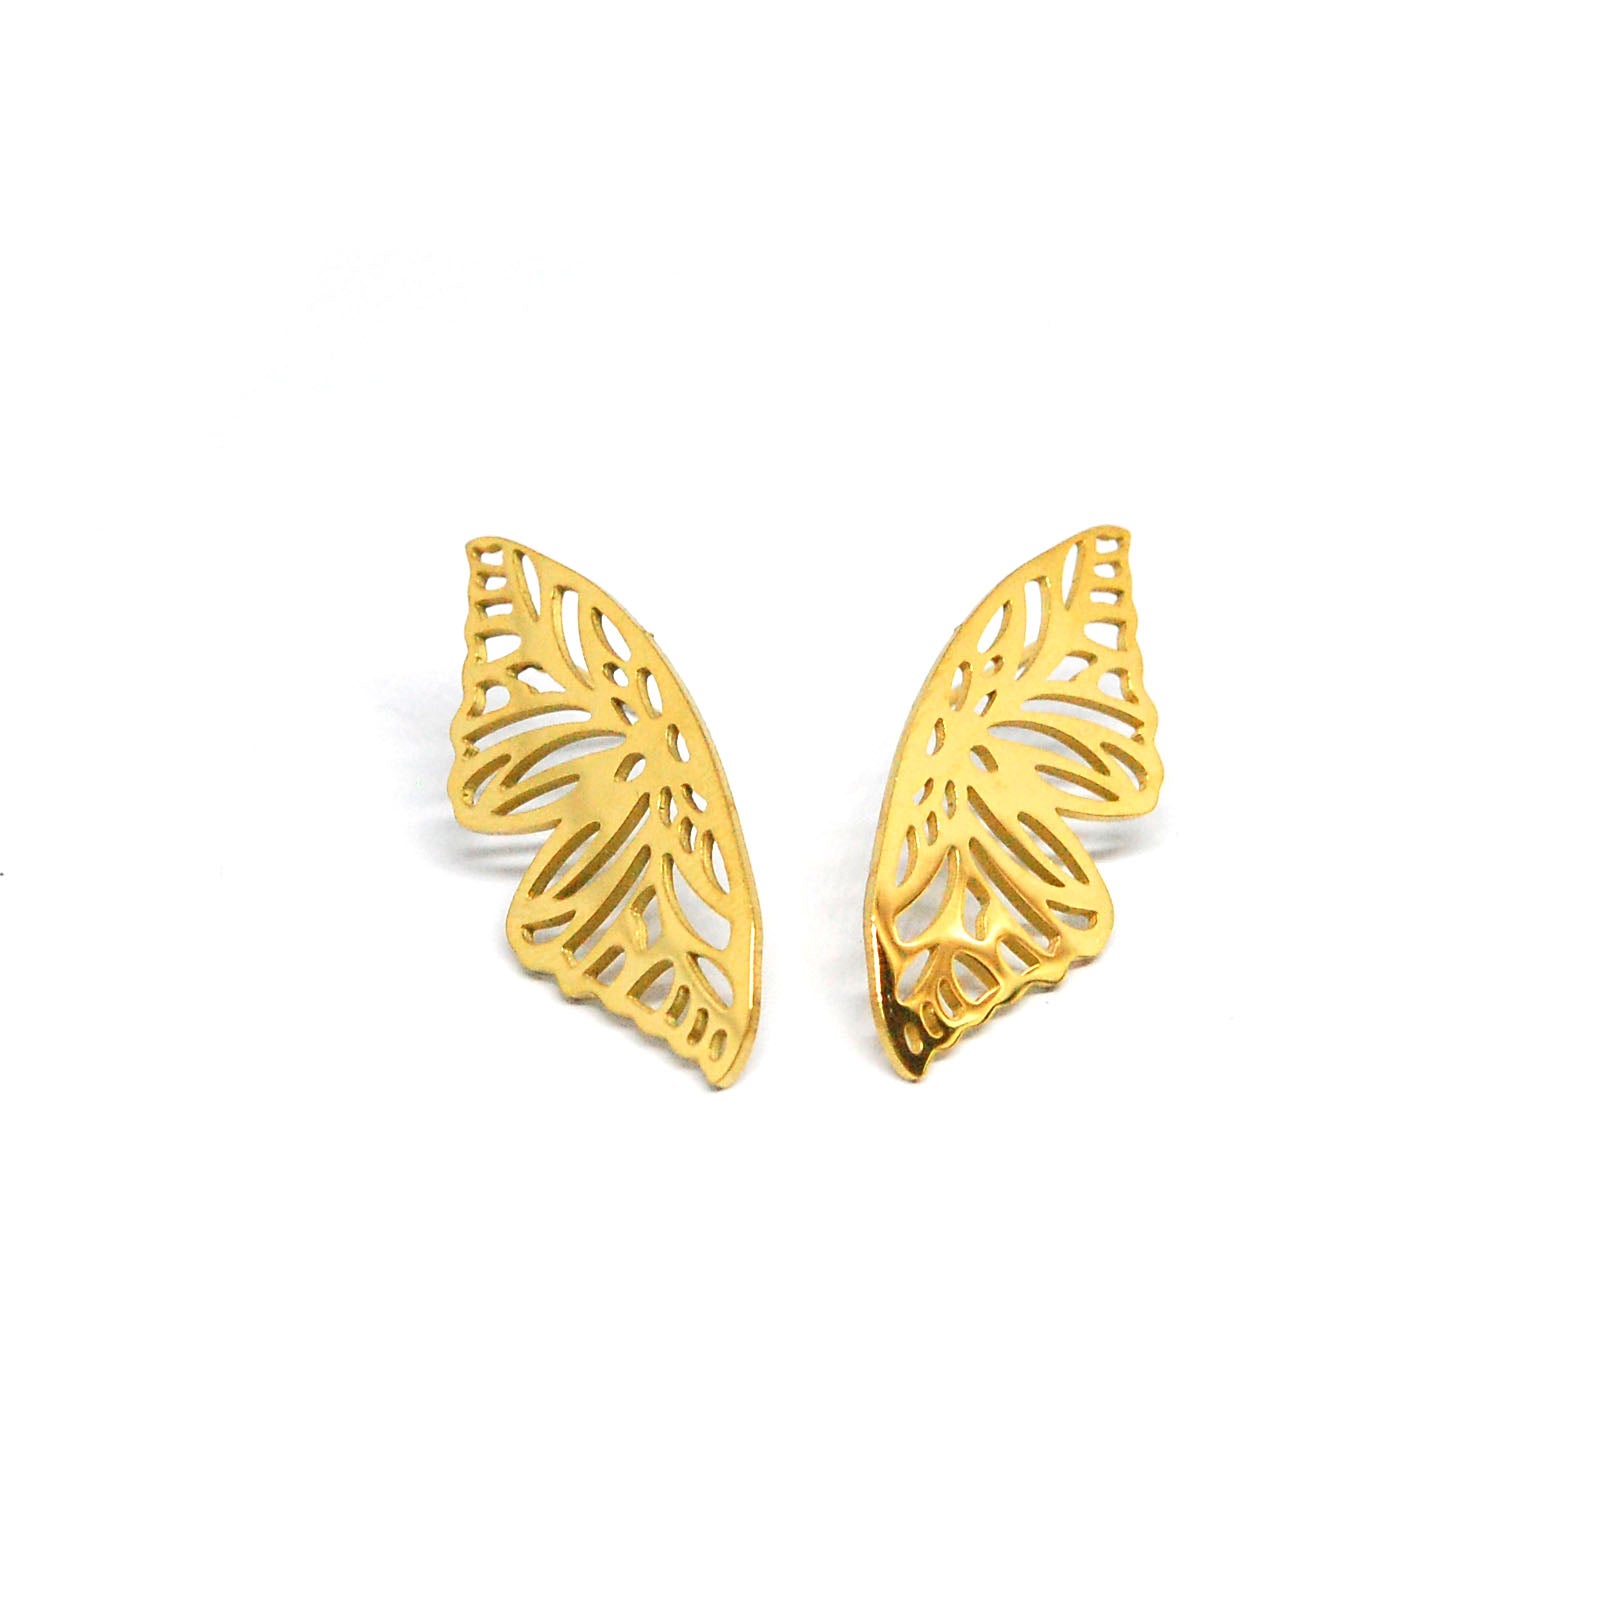 ESE 7633: All IPG Outlined Delicate Butterfly Wings Earrings